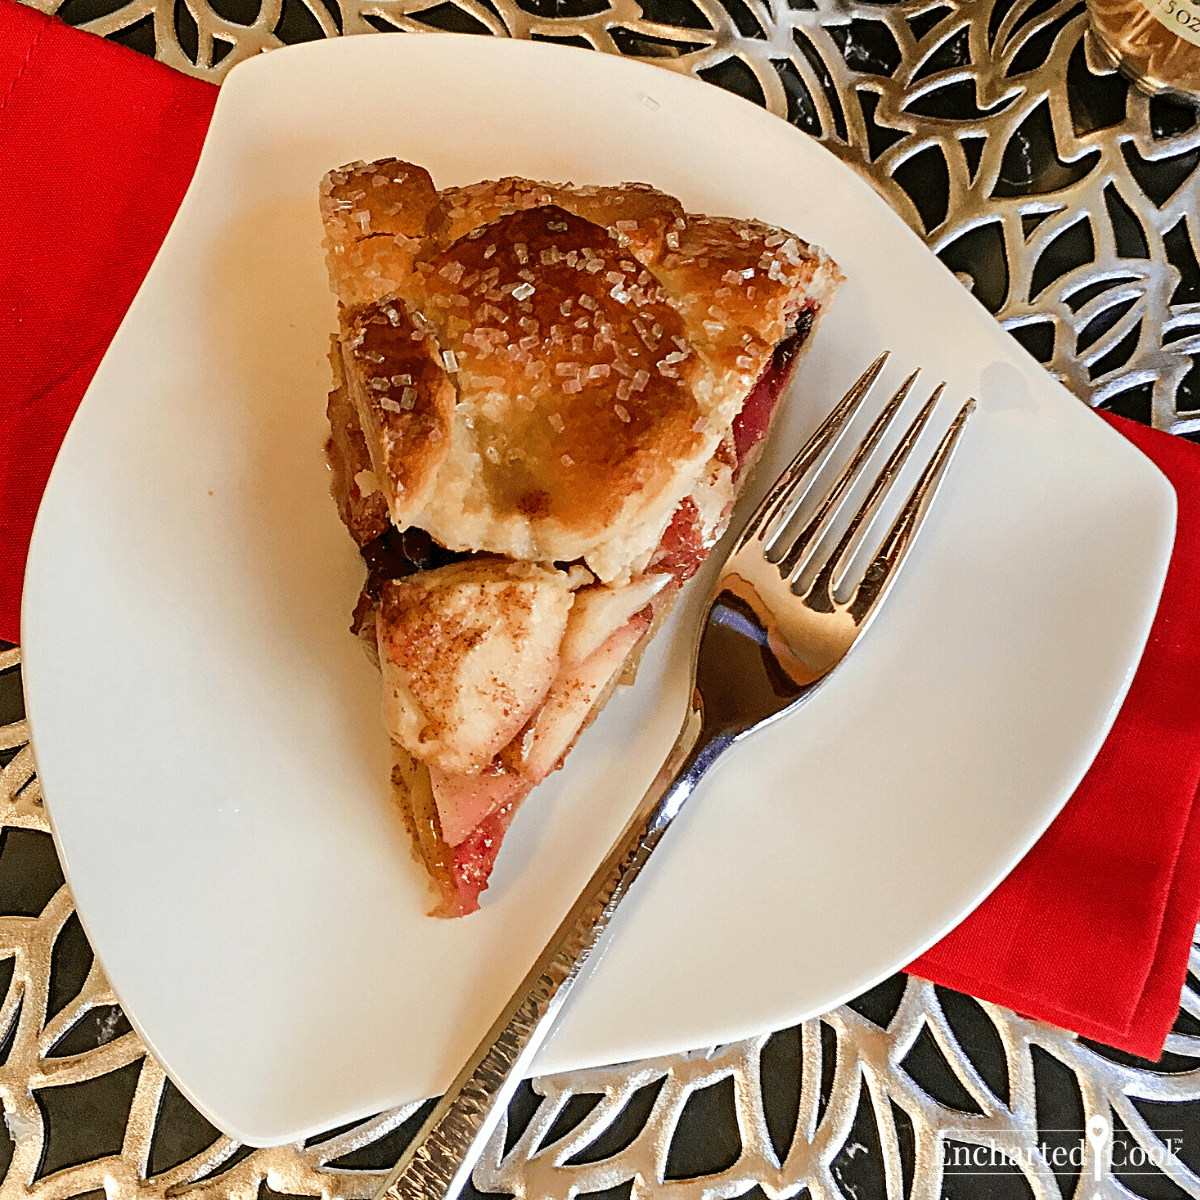 A slice of pie on a white plate with a fork and red napkin.